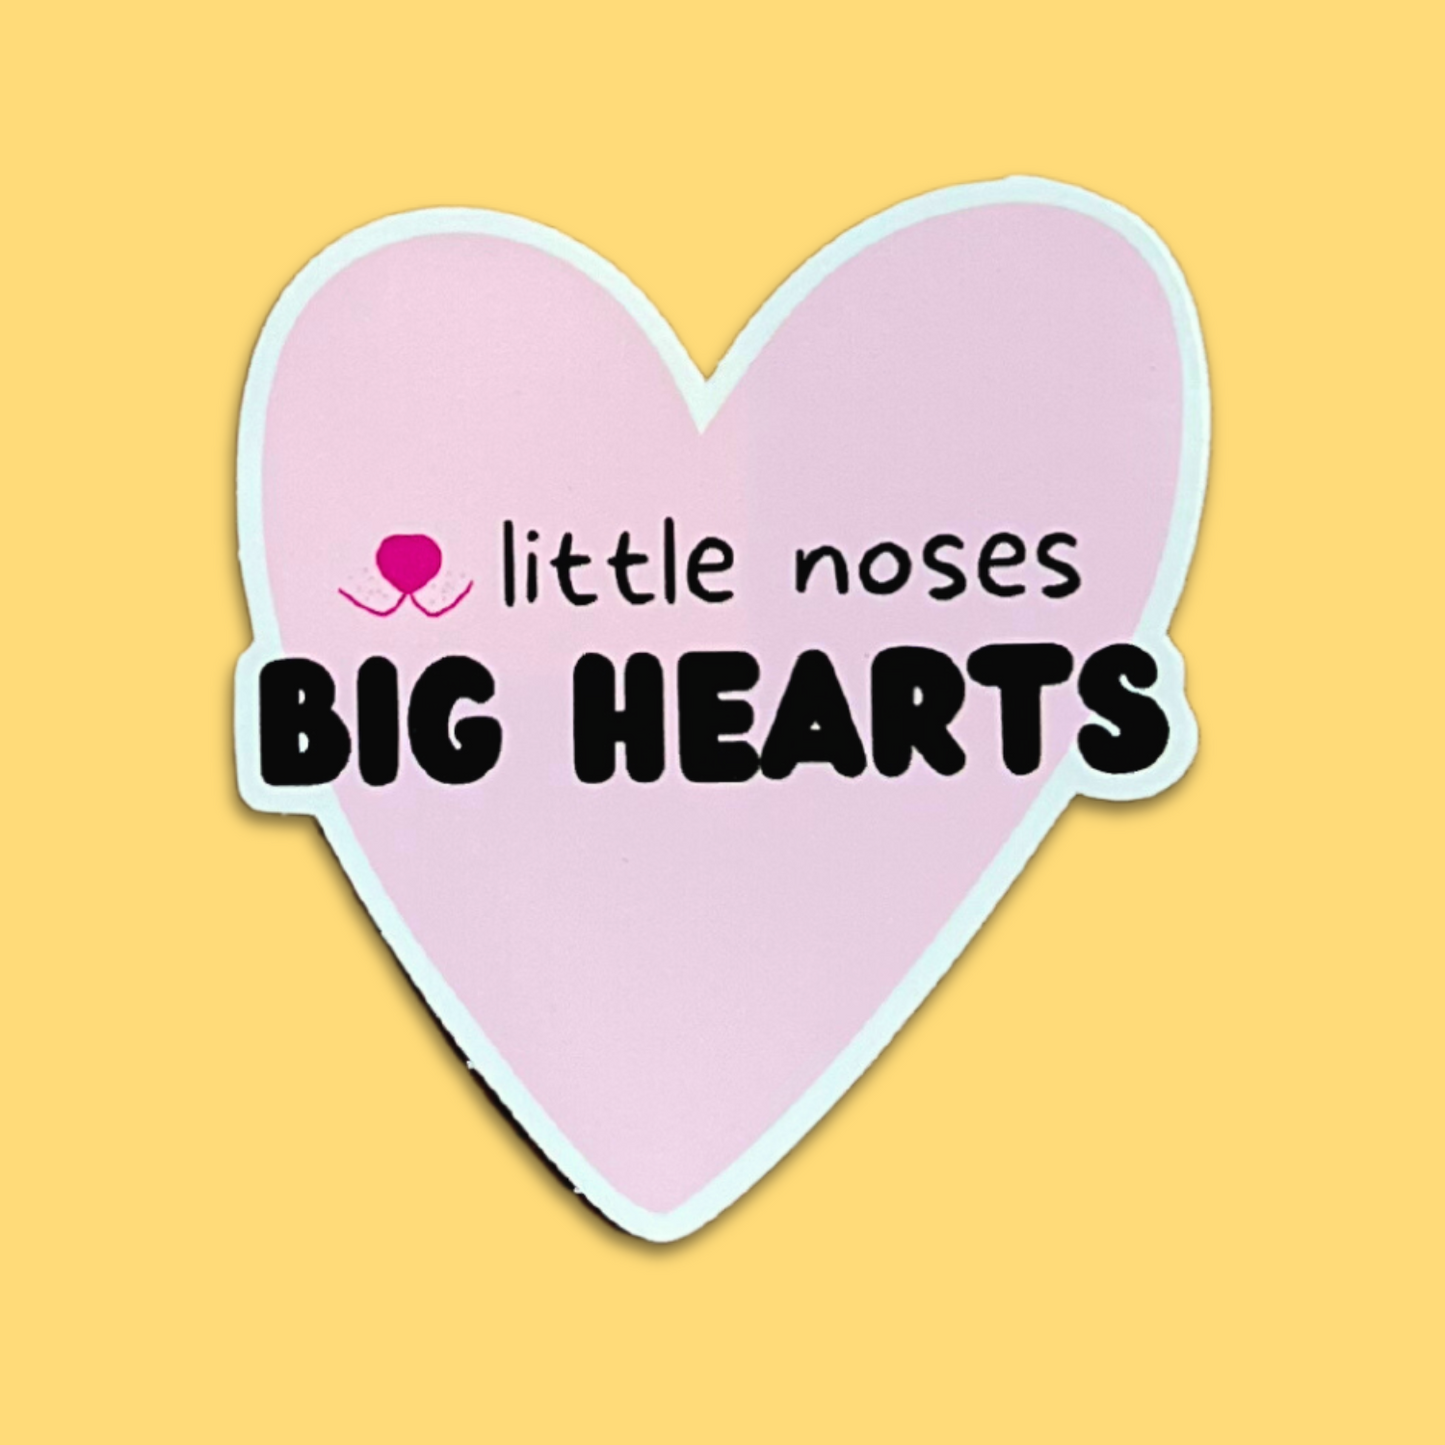 Little noses big hearts sticker